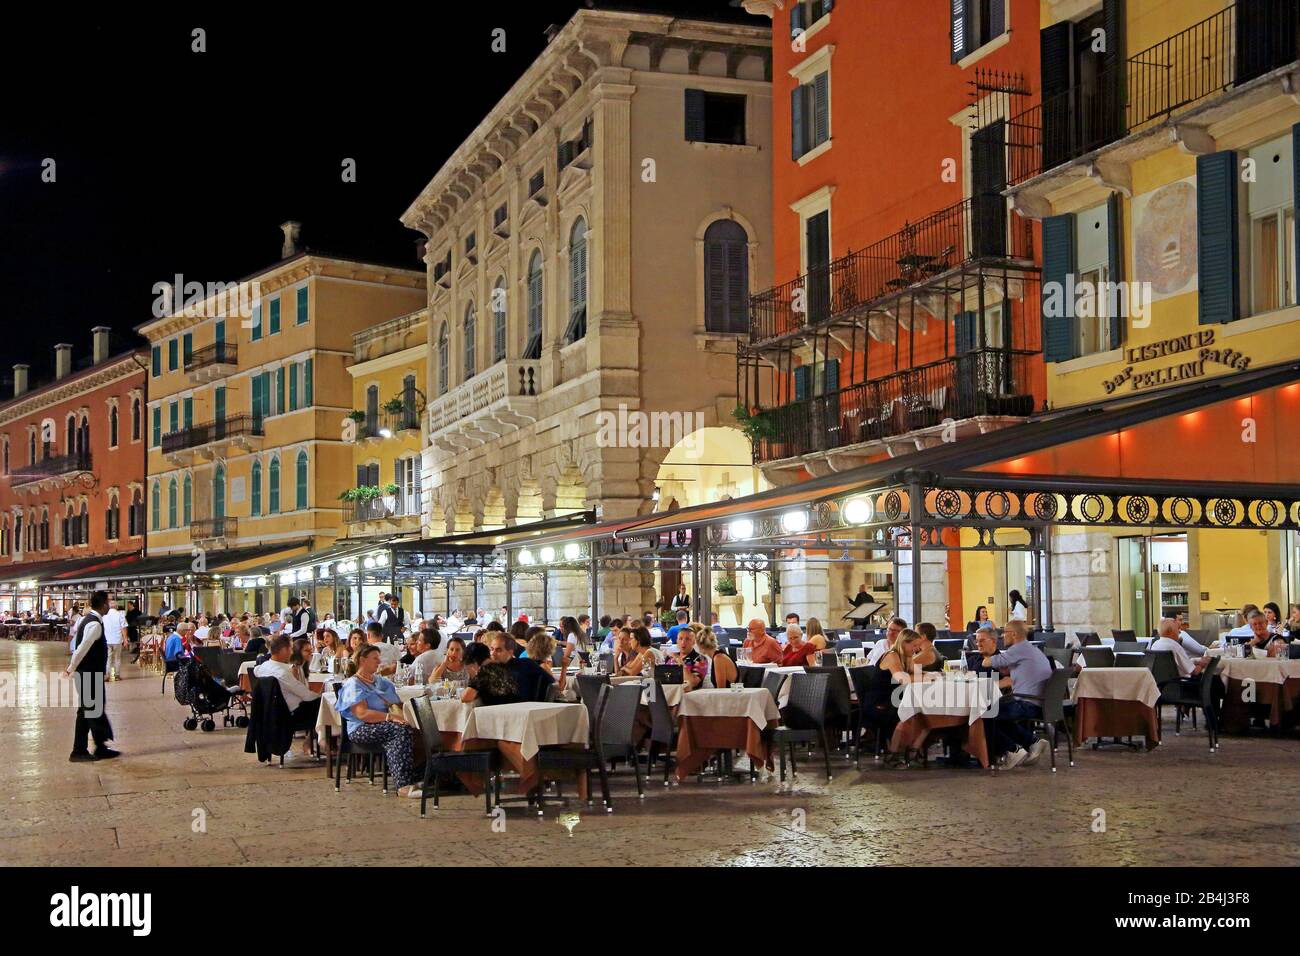 Palazzi in Piazza Bra with restaurant terraces at night, old town, Verona, Veneto, Italy Stock Photo